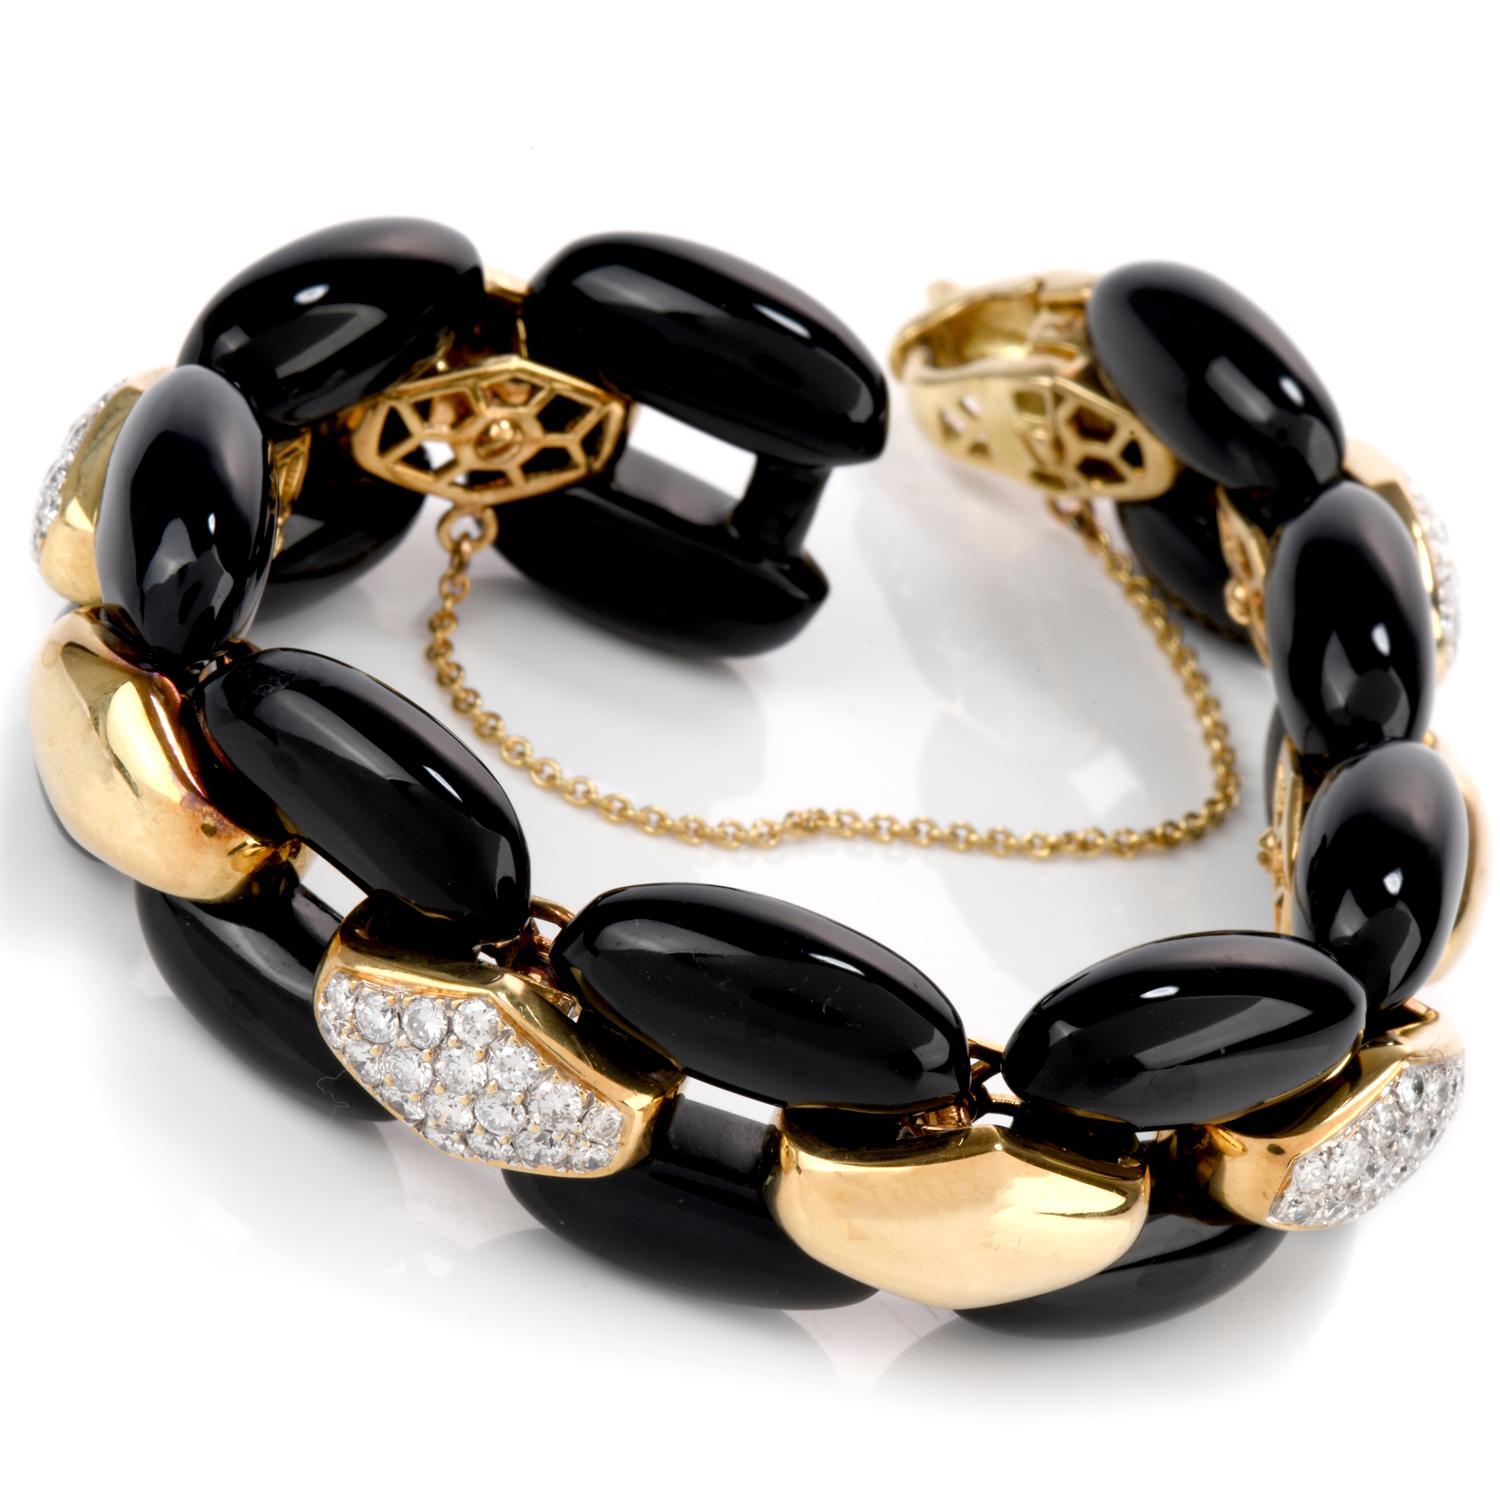 This beautiful and sophisticated Dimaond and Onyx

bracelet was inspired in a  Panther link design and crafted in 18K gold.

Large elongated pieces of Black Onyx are used to constuct the linked frame

with smaller diamond shaped polished domes of